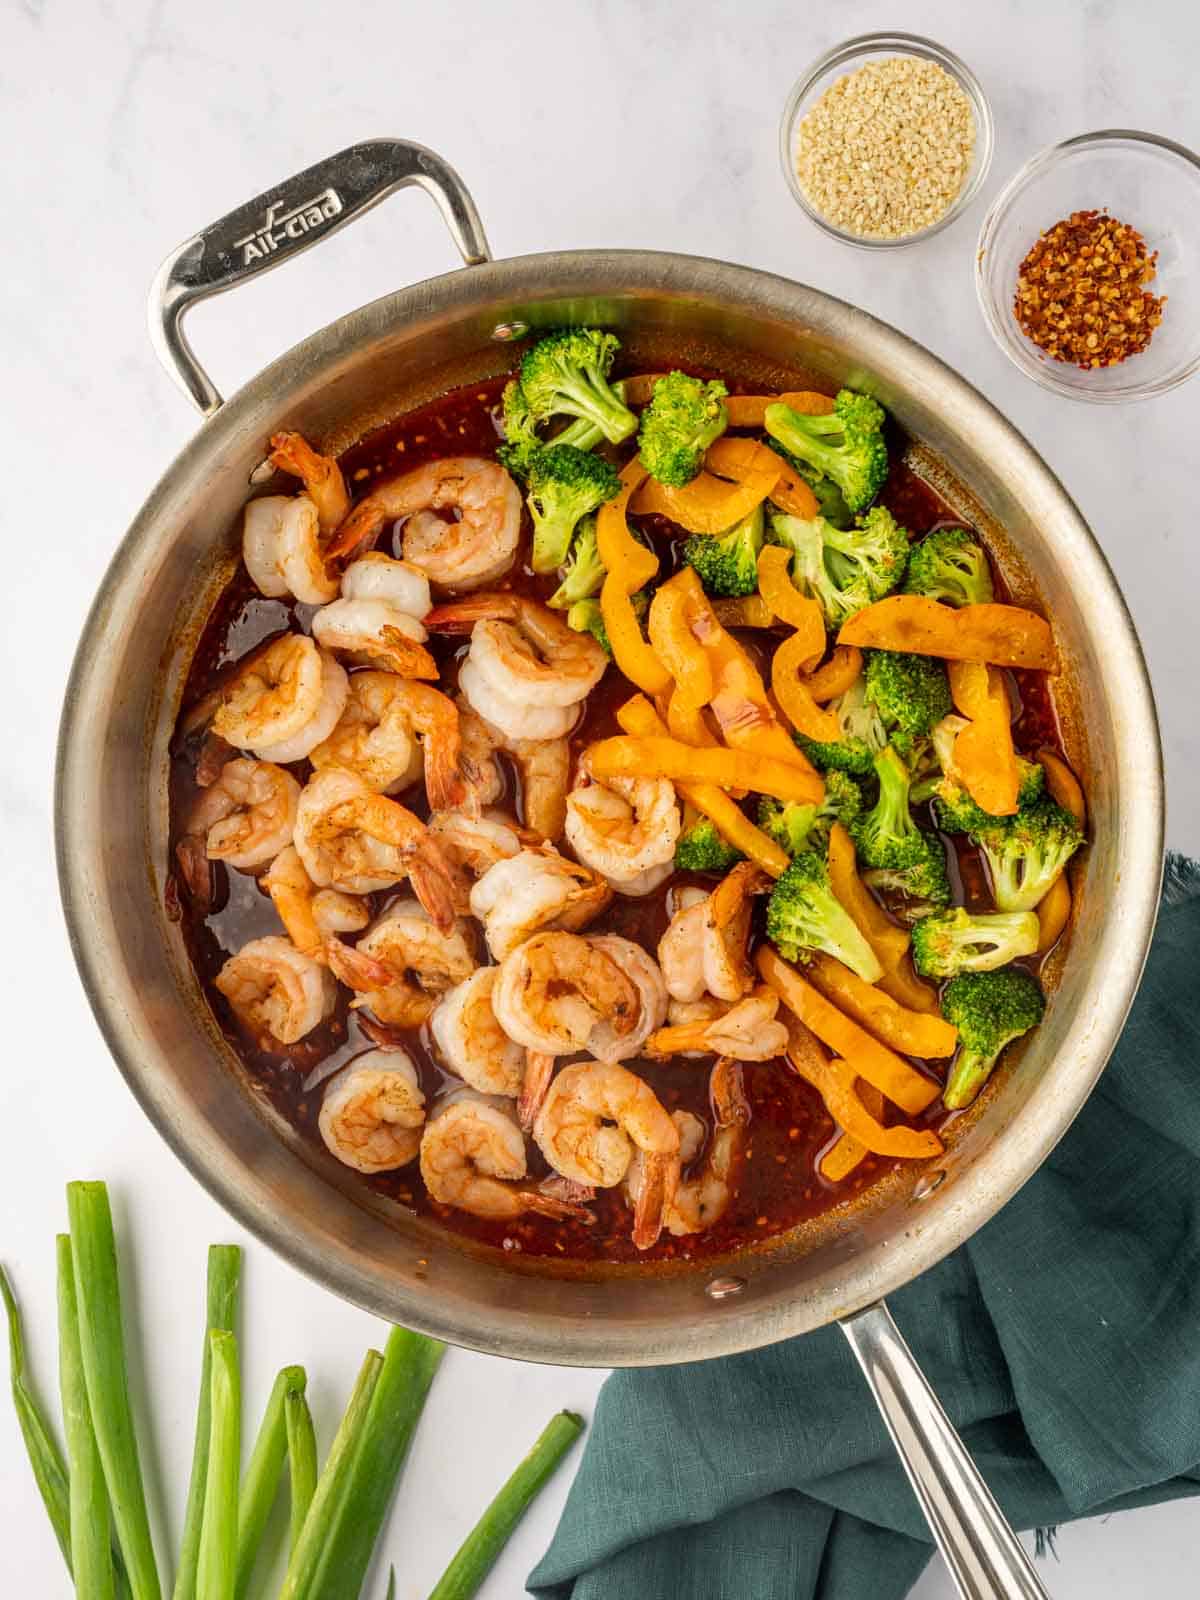 Combine shrimp and vegetables with chili sauce.